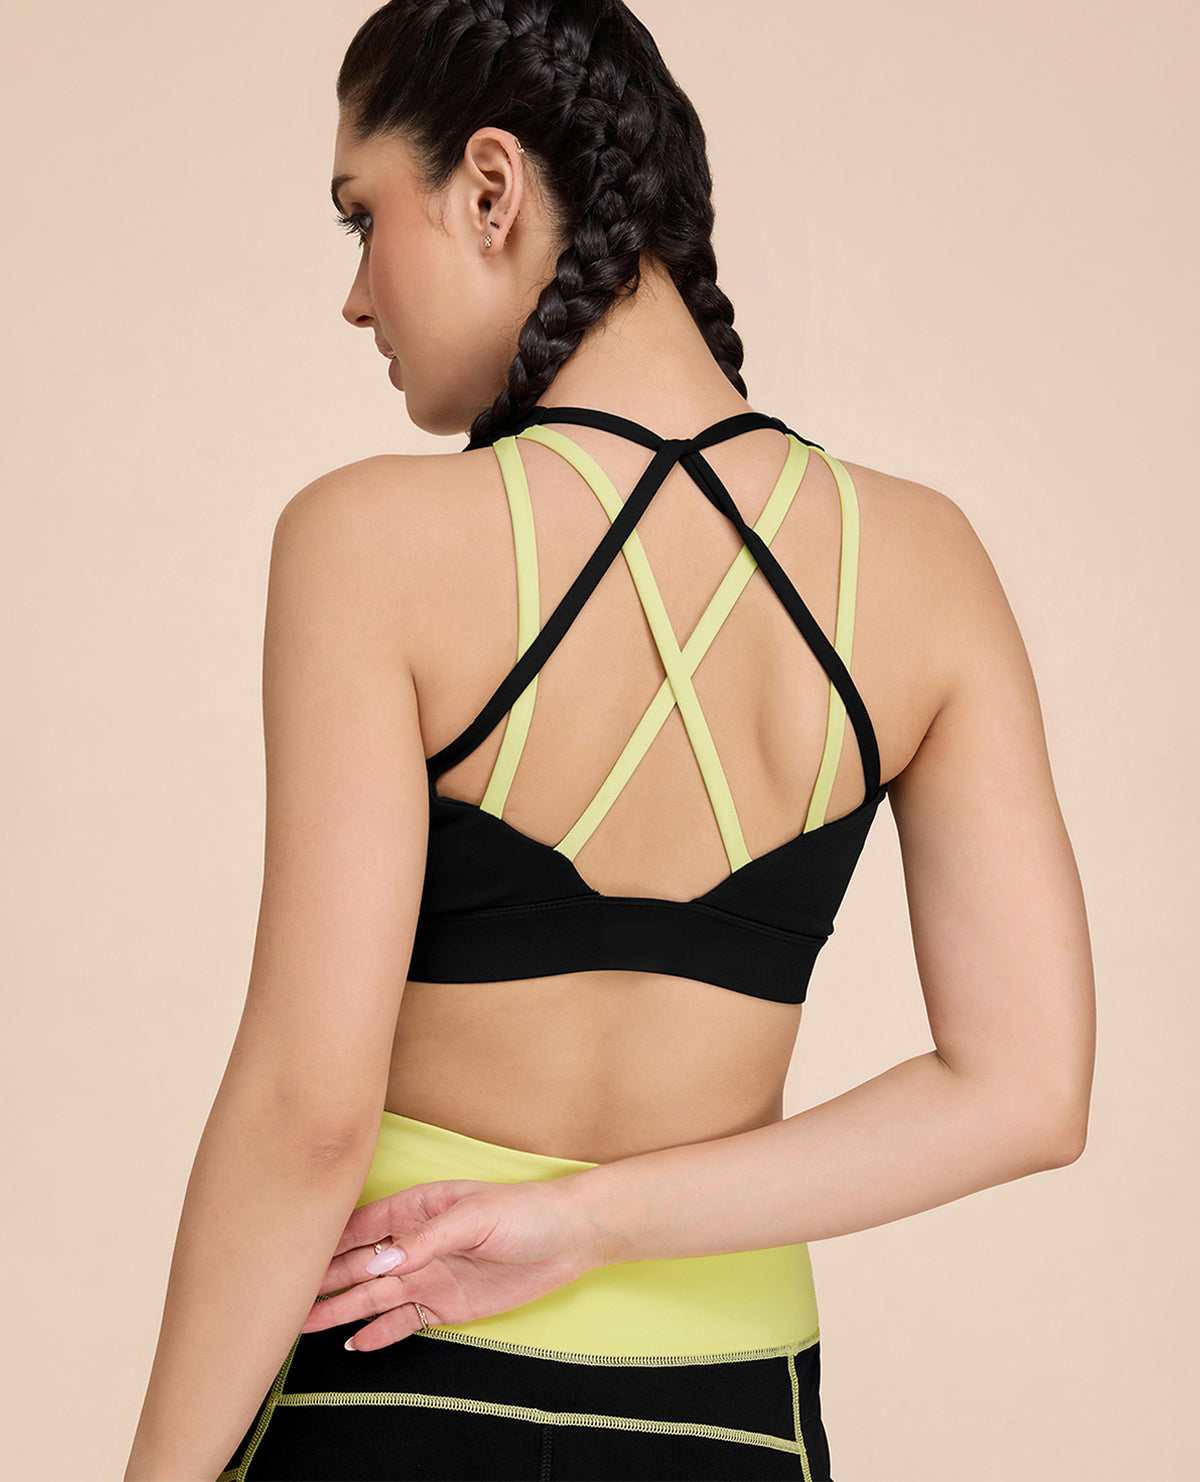 Buy Kica Mid Impact Strappy Sports Bra in Second SKN Fabric With Strappy  Details For Gymming And Training Online